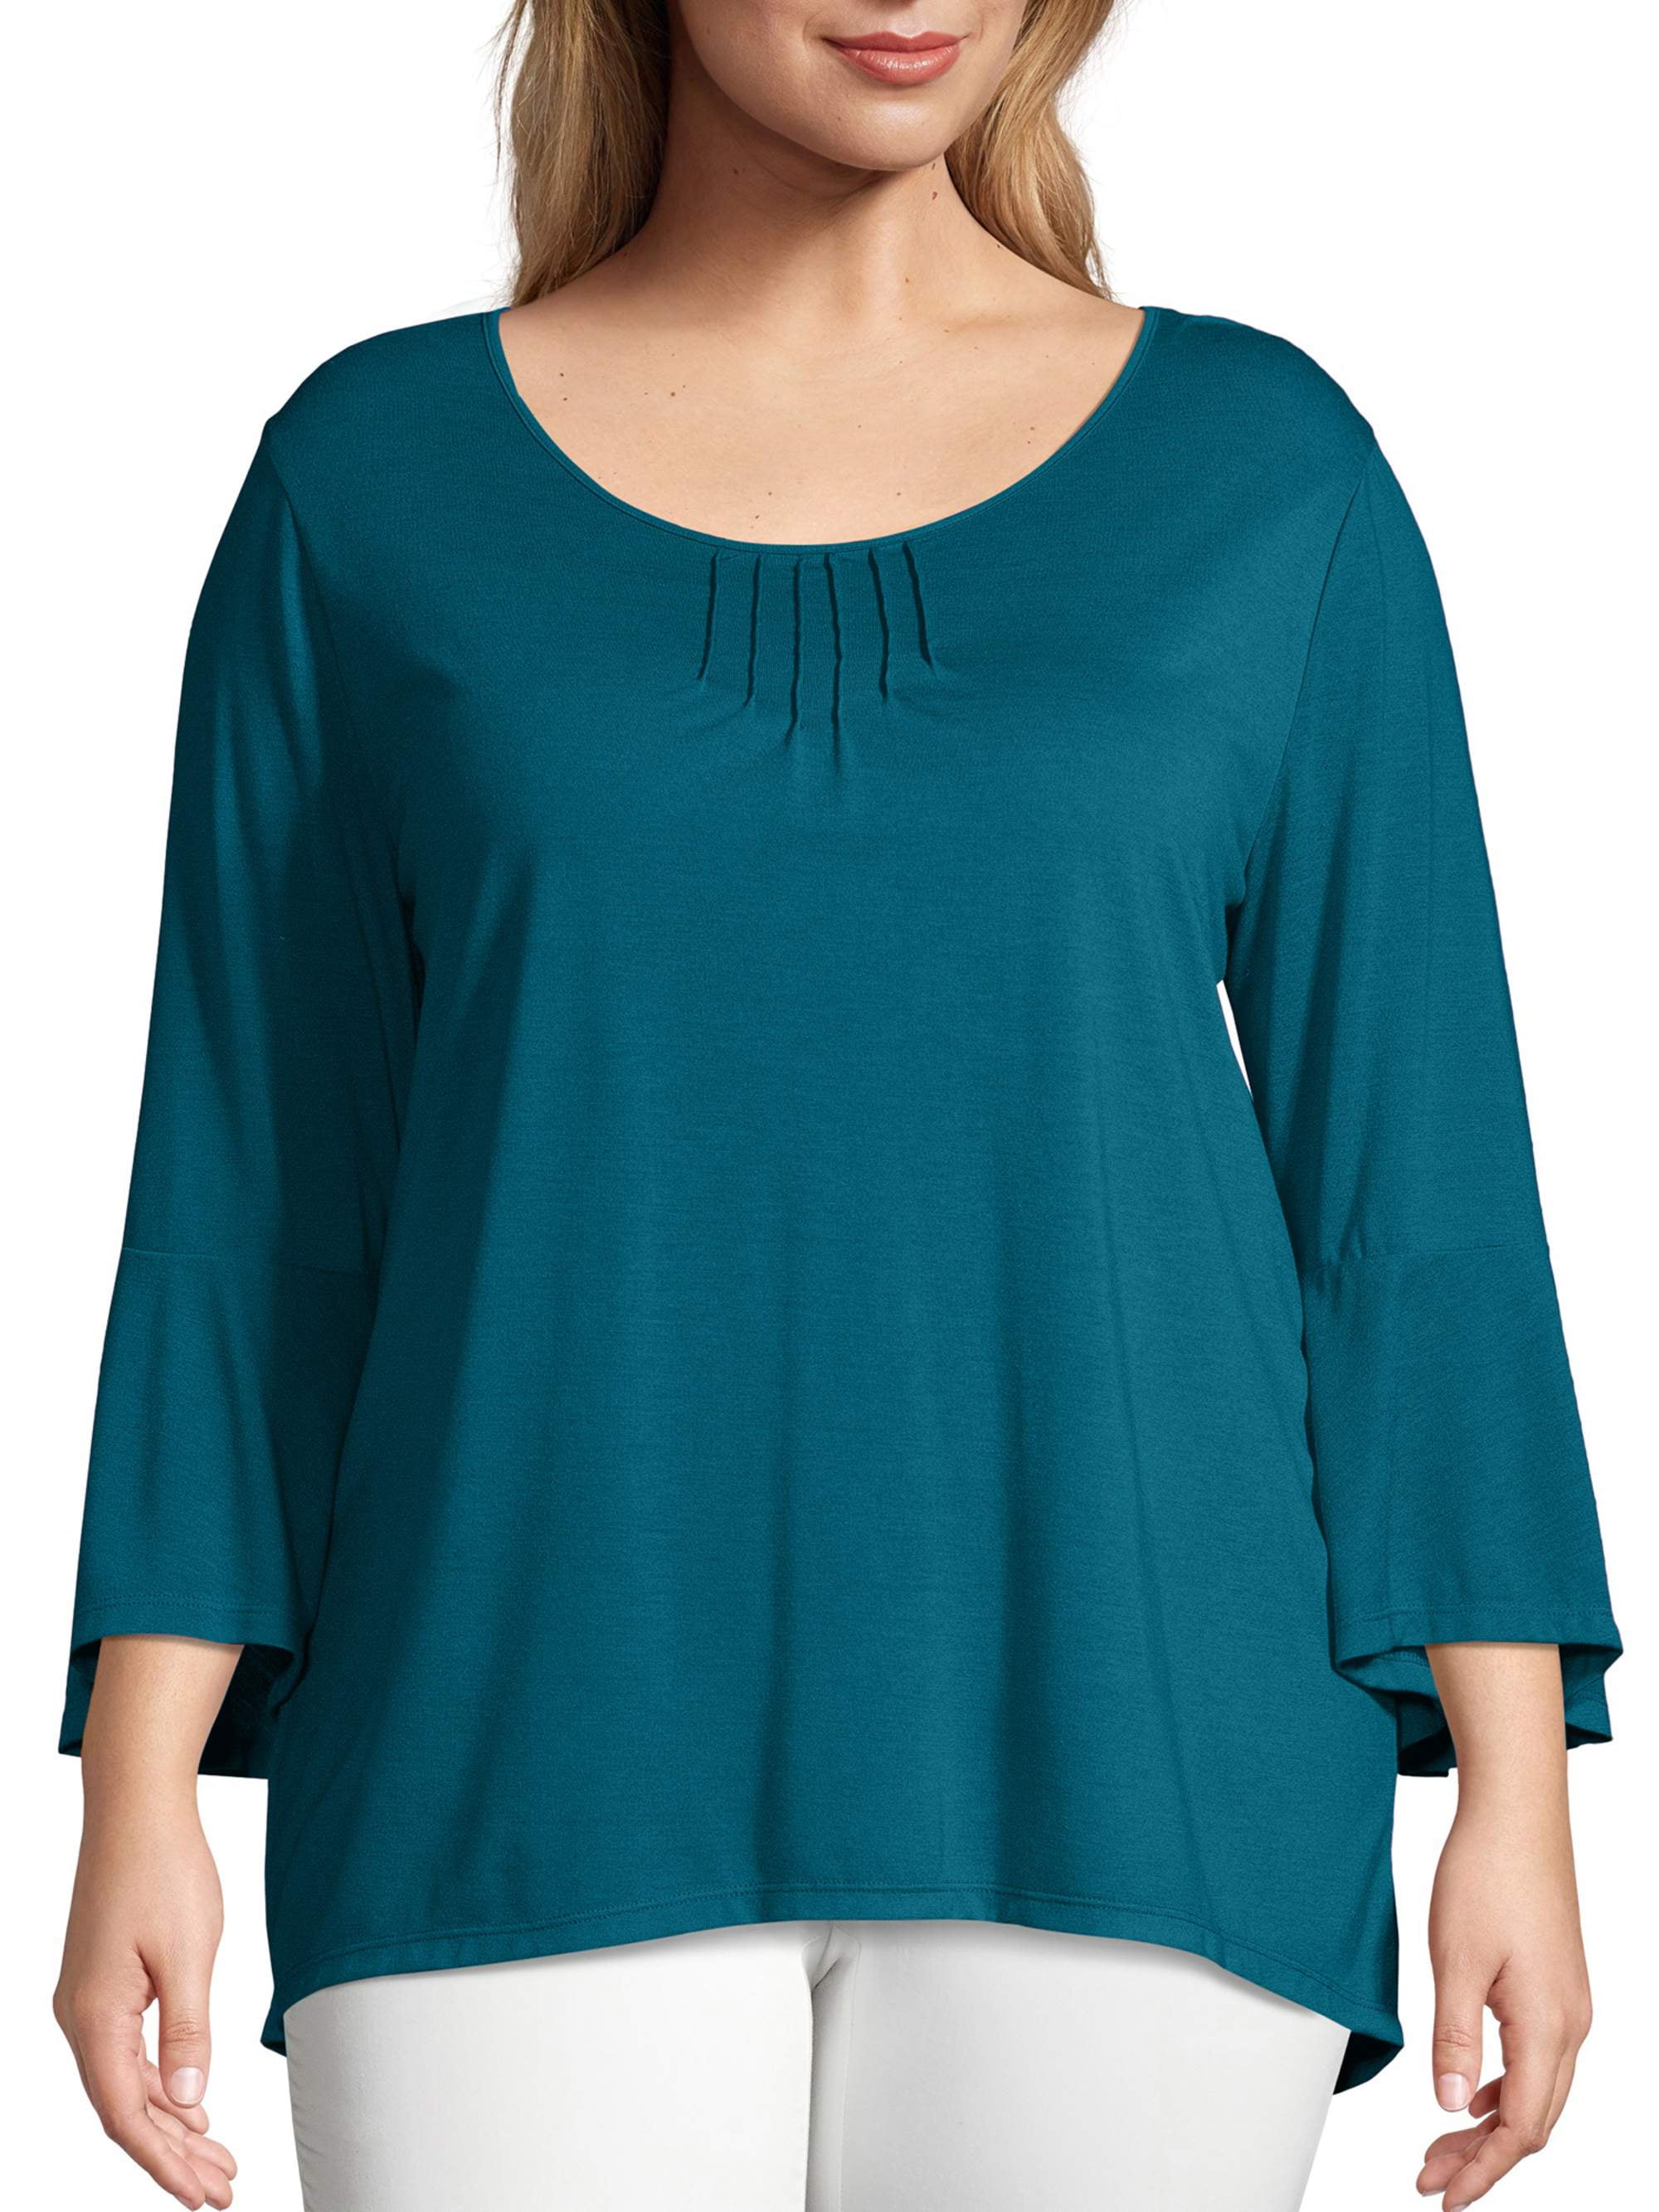 Just My Size Women's Plus Size Bell Sleeve Pin-tuck Top - Walmart.com